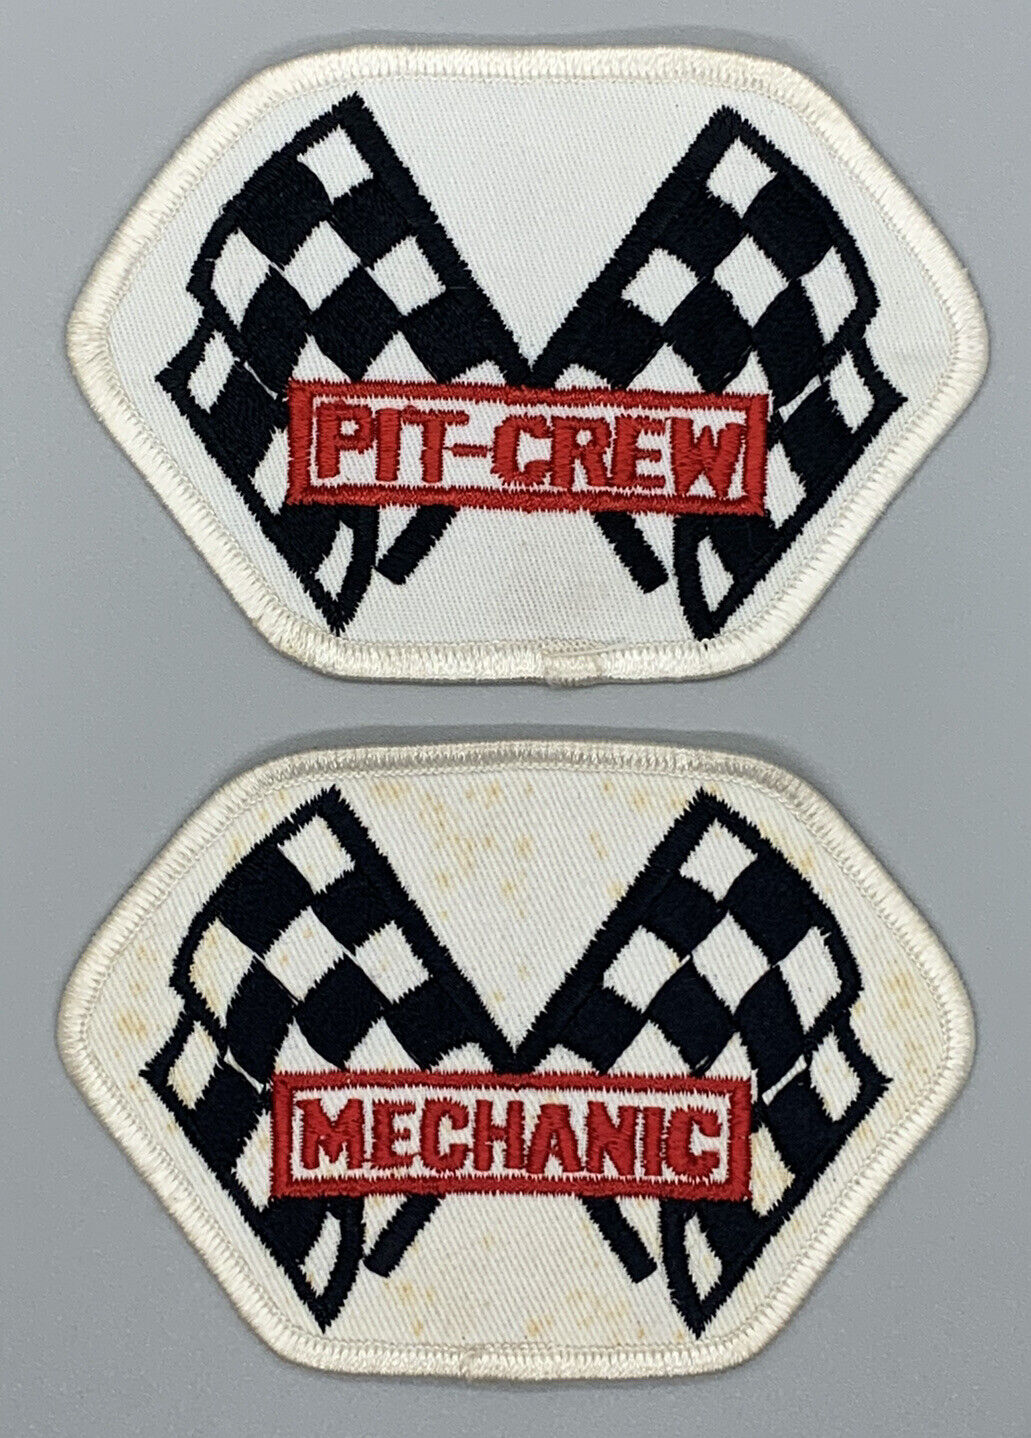 Vintage Mechanic and Pit Crew Patch Nascar Checkered Flag